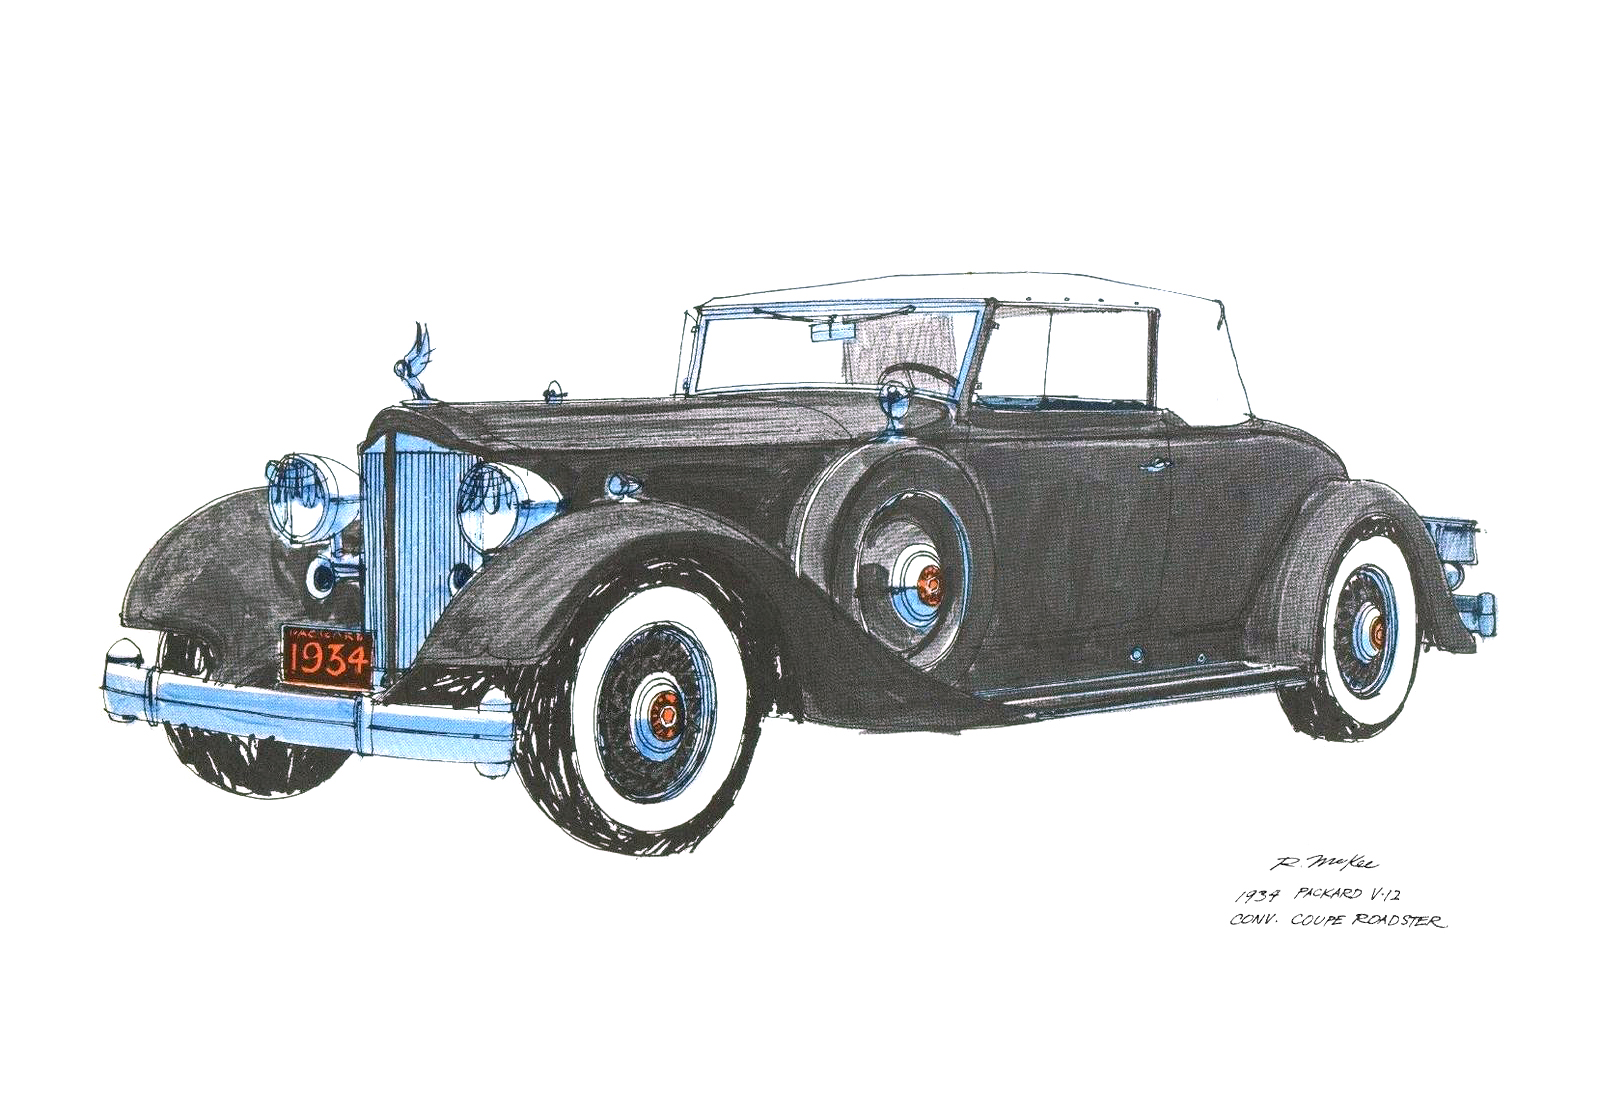 1934 Packard V-12 Convertible Coupe Roadster: Illustrated by Ron McKee